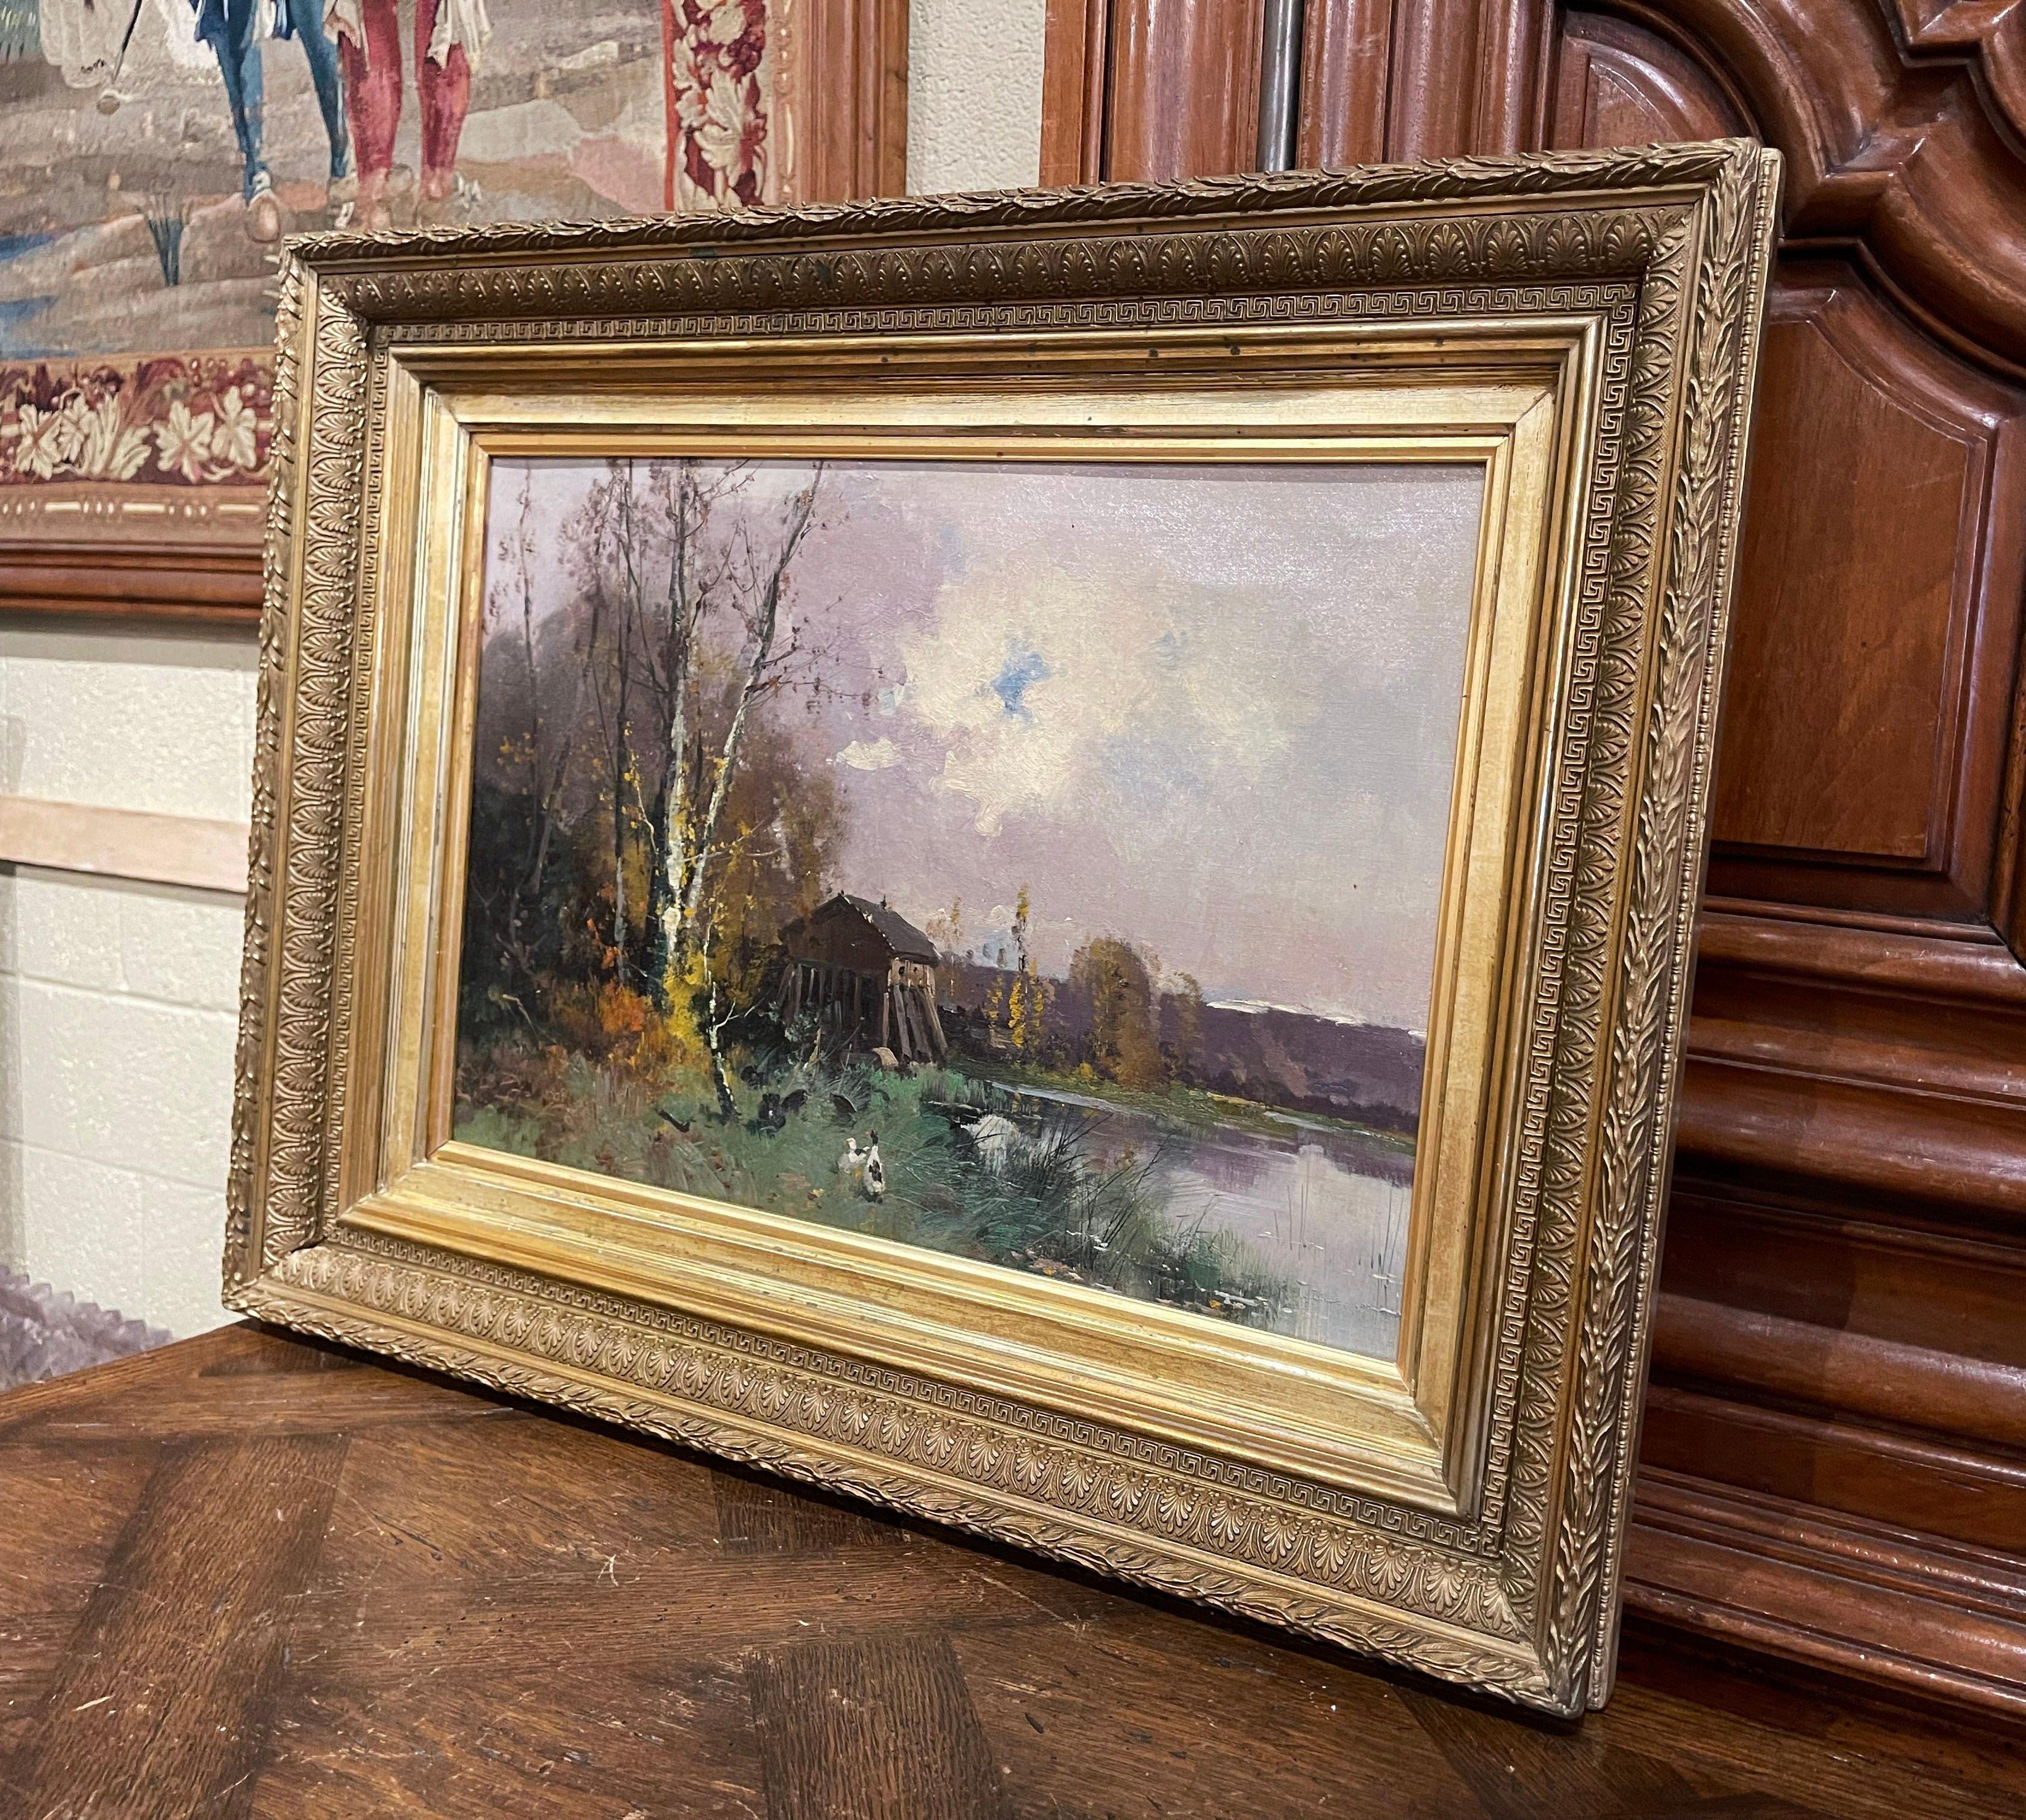 This 19th century impressionist painting was crafted in France, circa 1890. Set in a carved giltwood frame, the artwork painted on canvas, illustrates a picturesque, countryside landscape scene with a forest, barn, chickens, ducks, and a pond in the